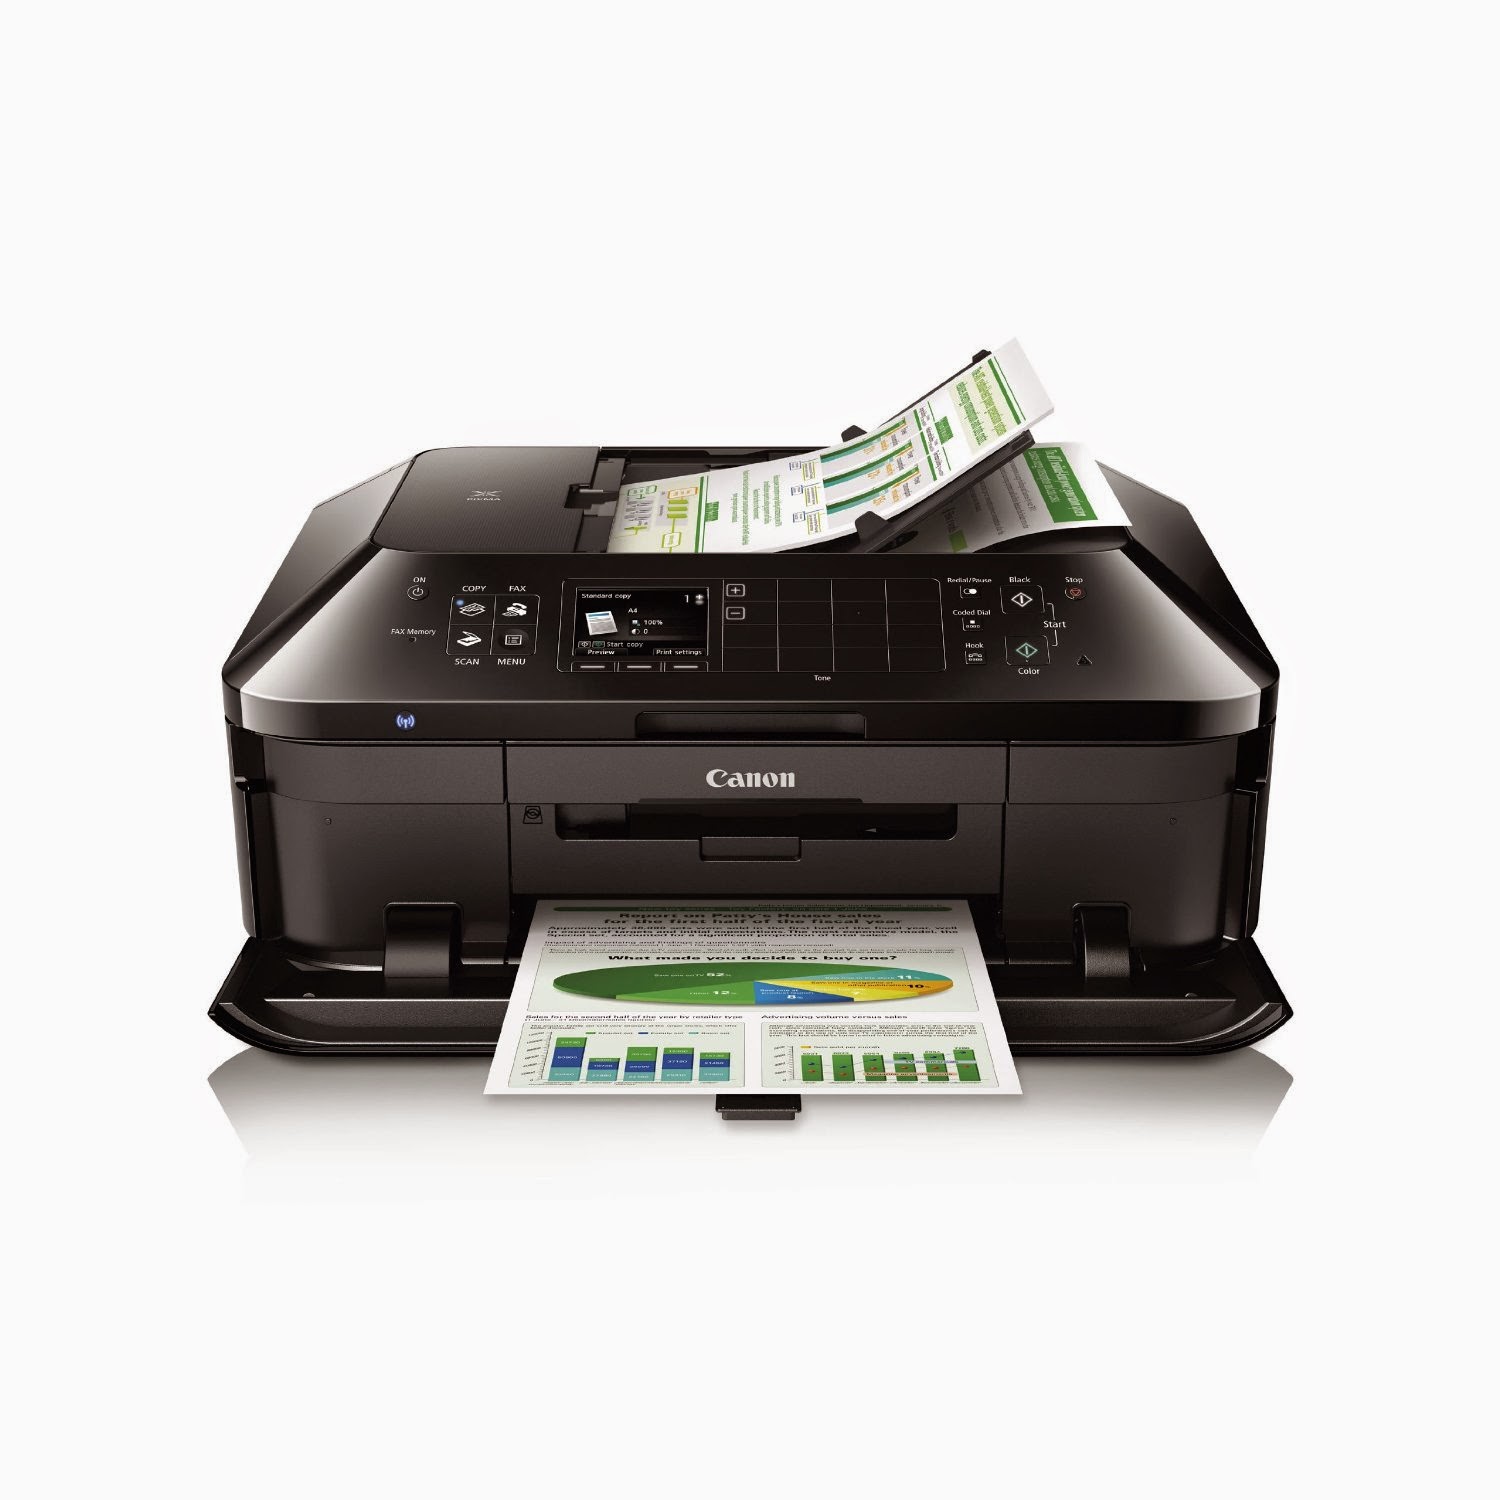 Canon PIXMA MX922 Wireless Color Photo Printer with Scanner, Copier, and Fax